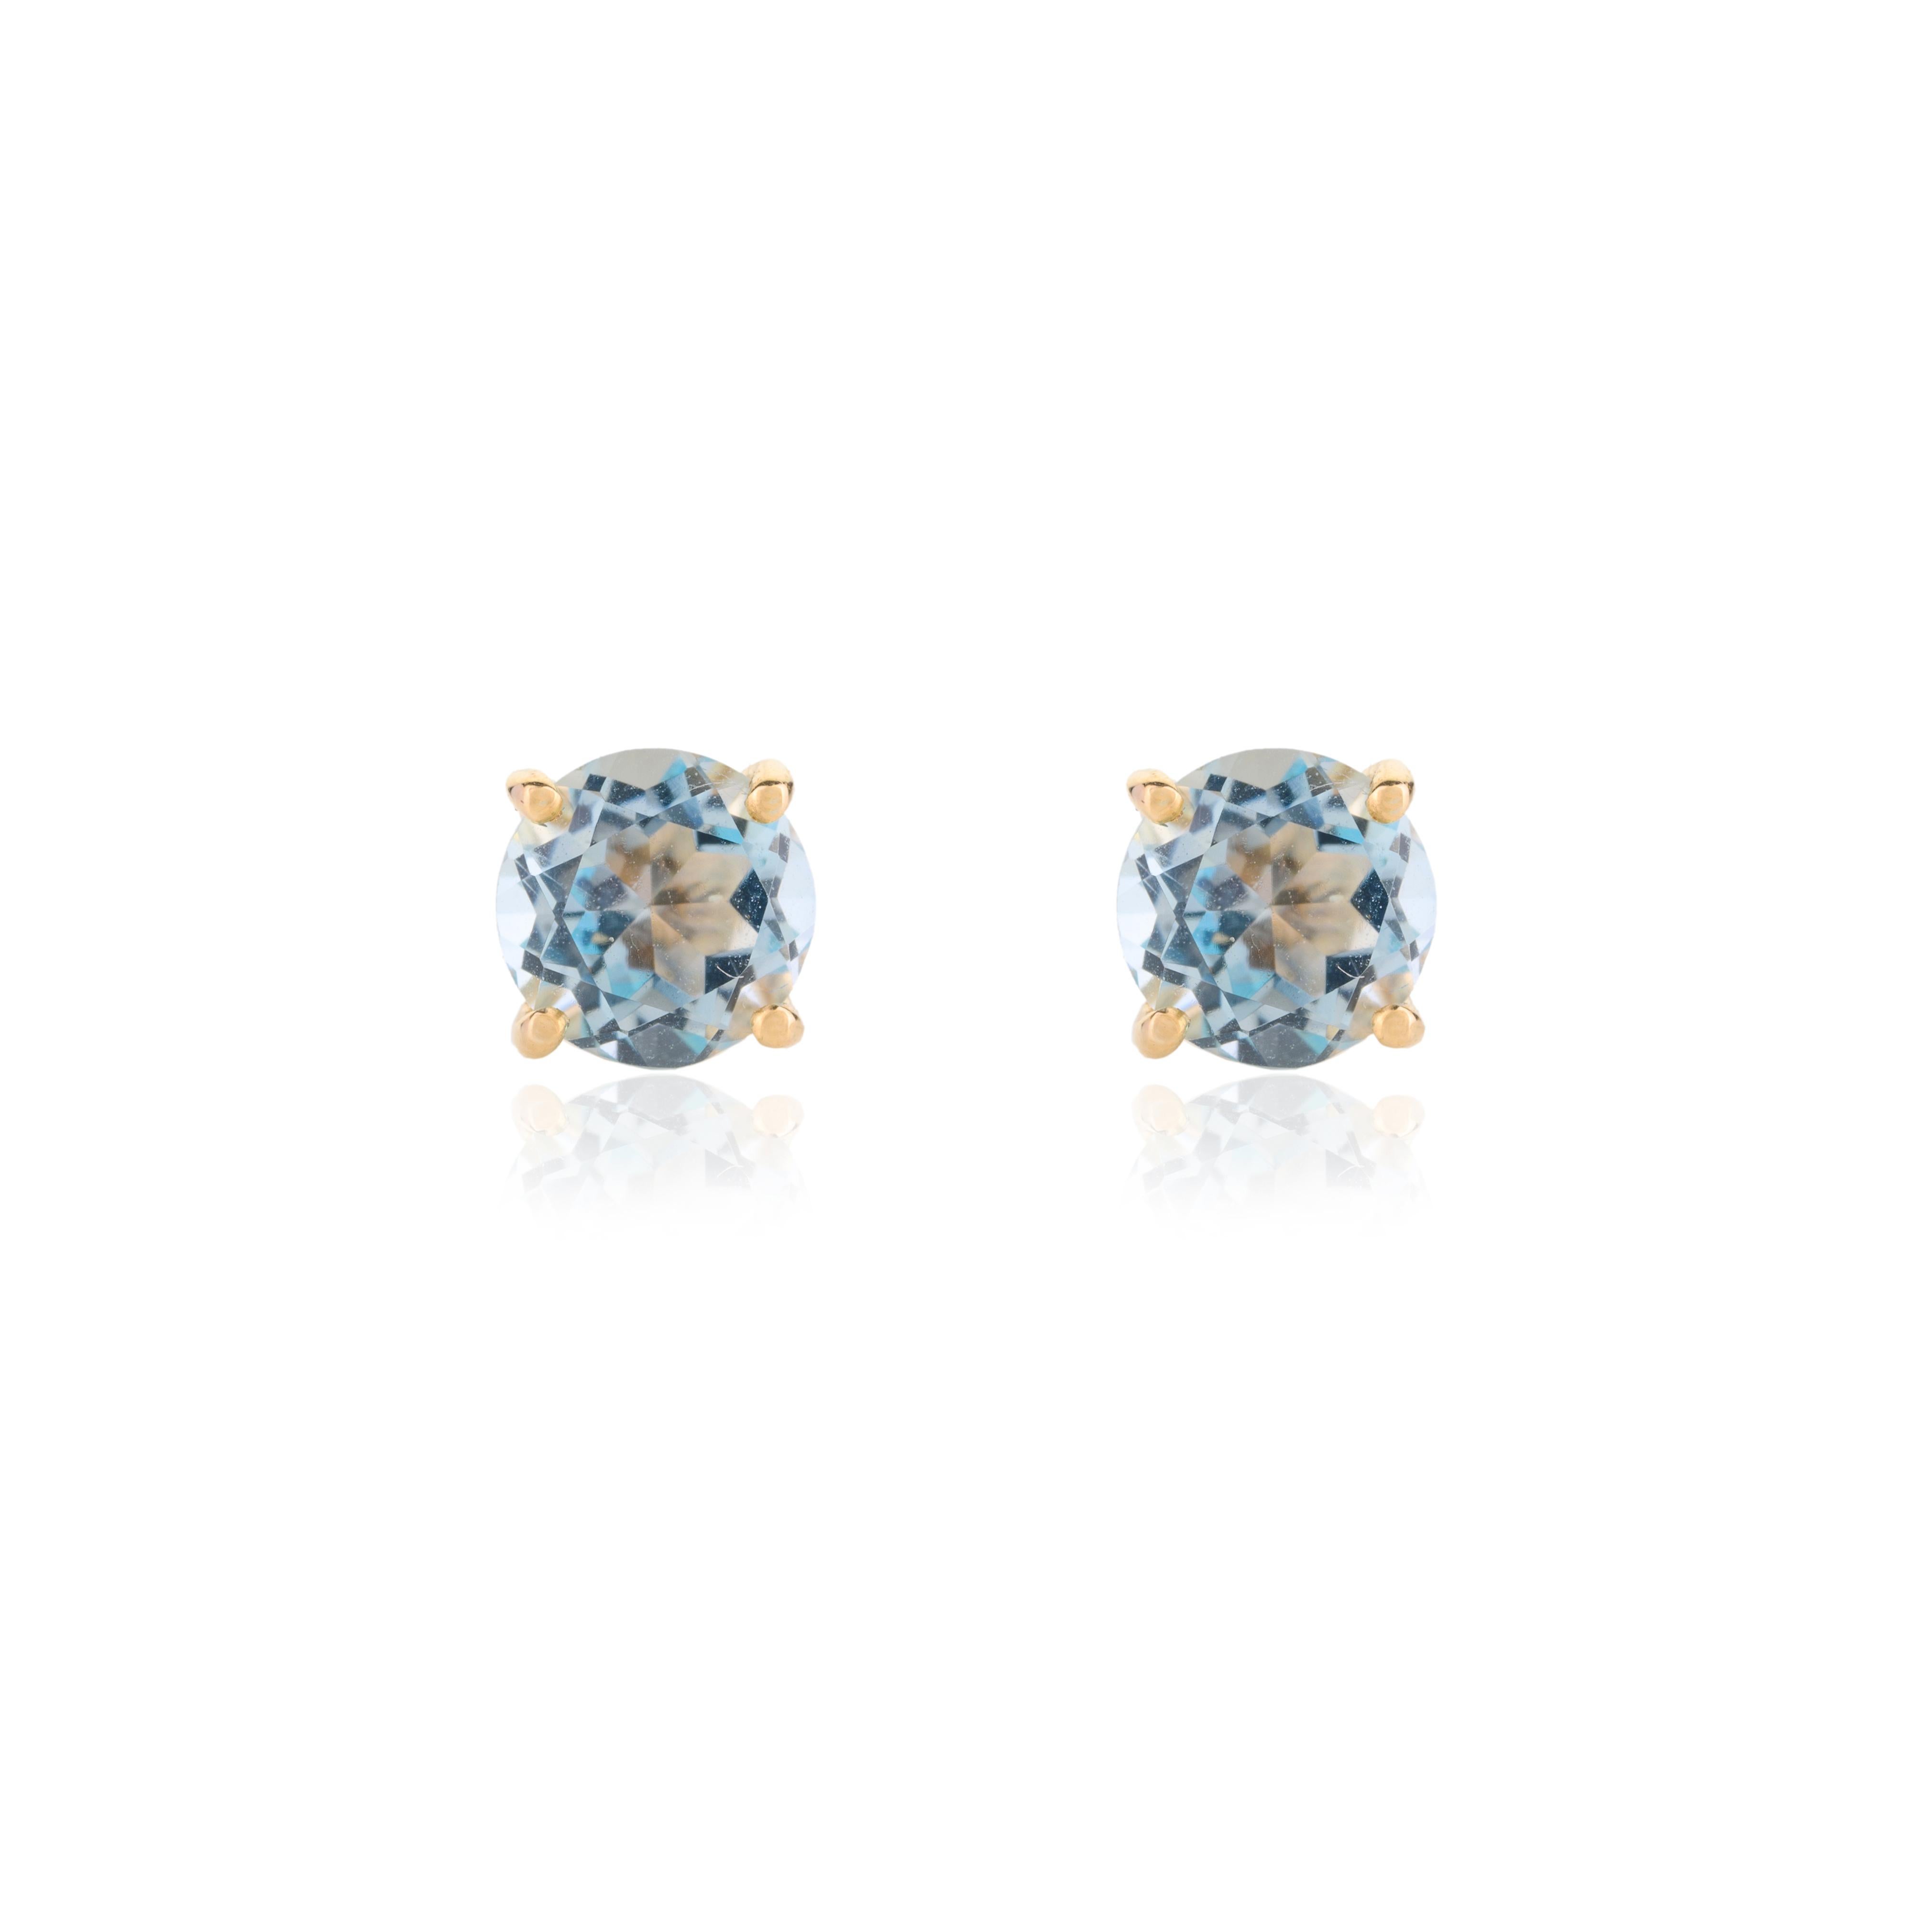 2.13 Carats Blue Topaz Pushback Stud Earrings for Her in 14k Solid Yellow Gold For Sale 1